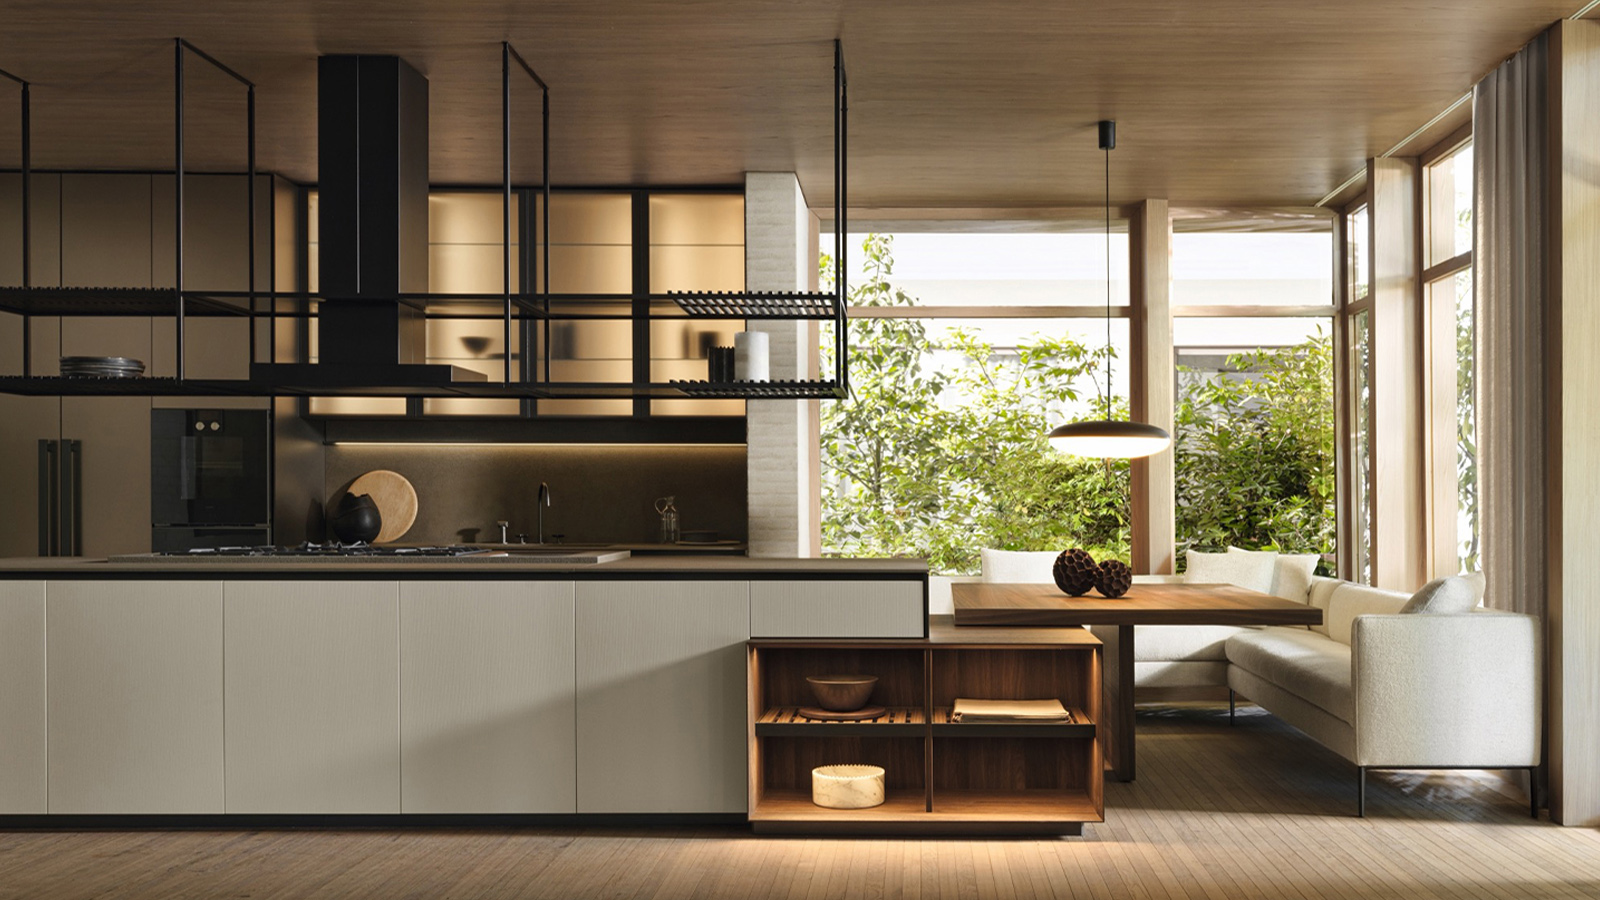 PRIME KITCHEN DESIGNED FOR EVERY NEED